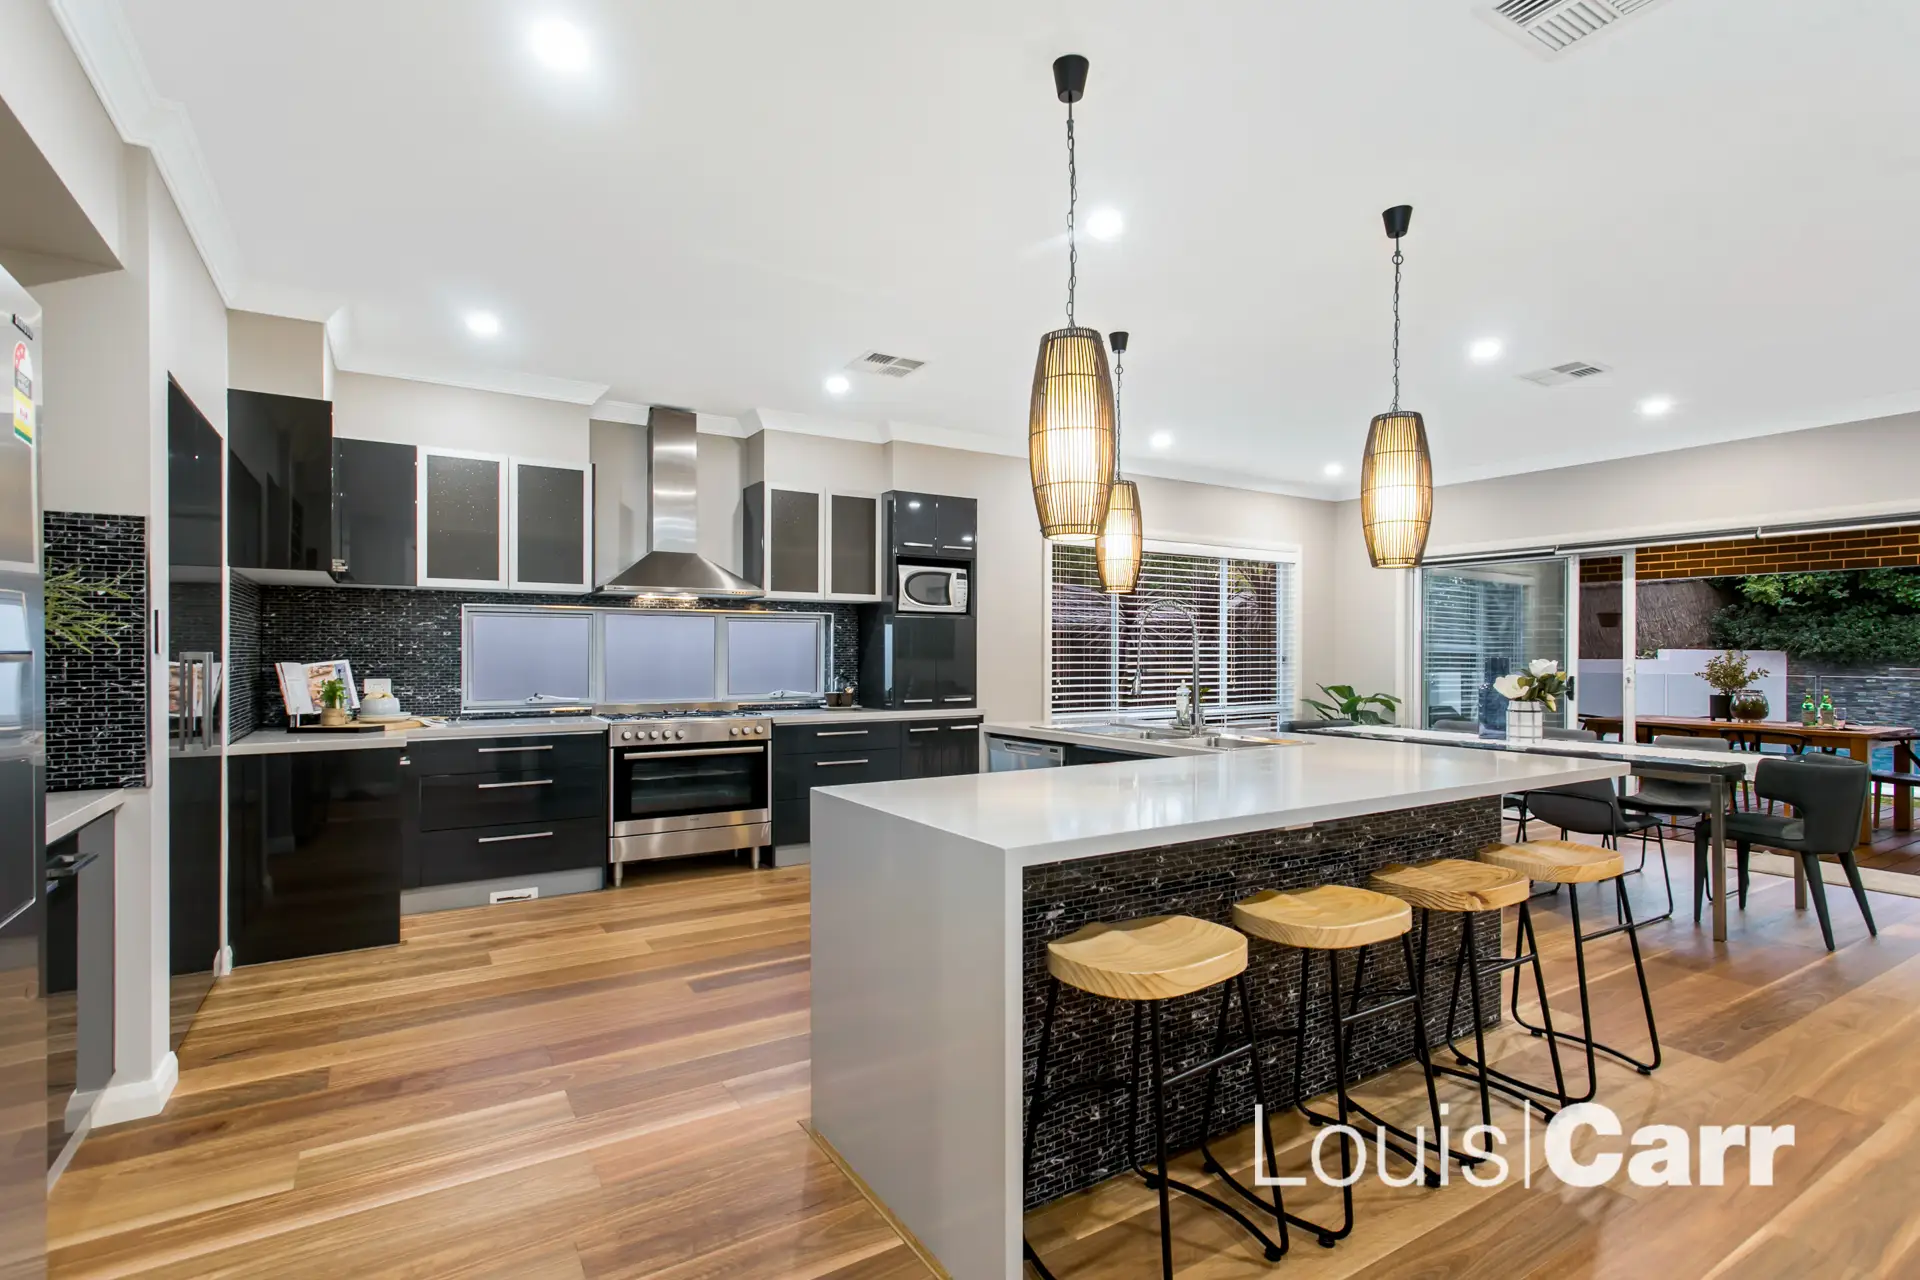 Photo #2: 151 Oratava Avenue, West Pennant Hills - Sold by Louis Carr Real Estate